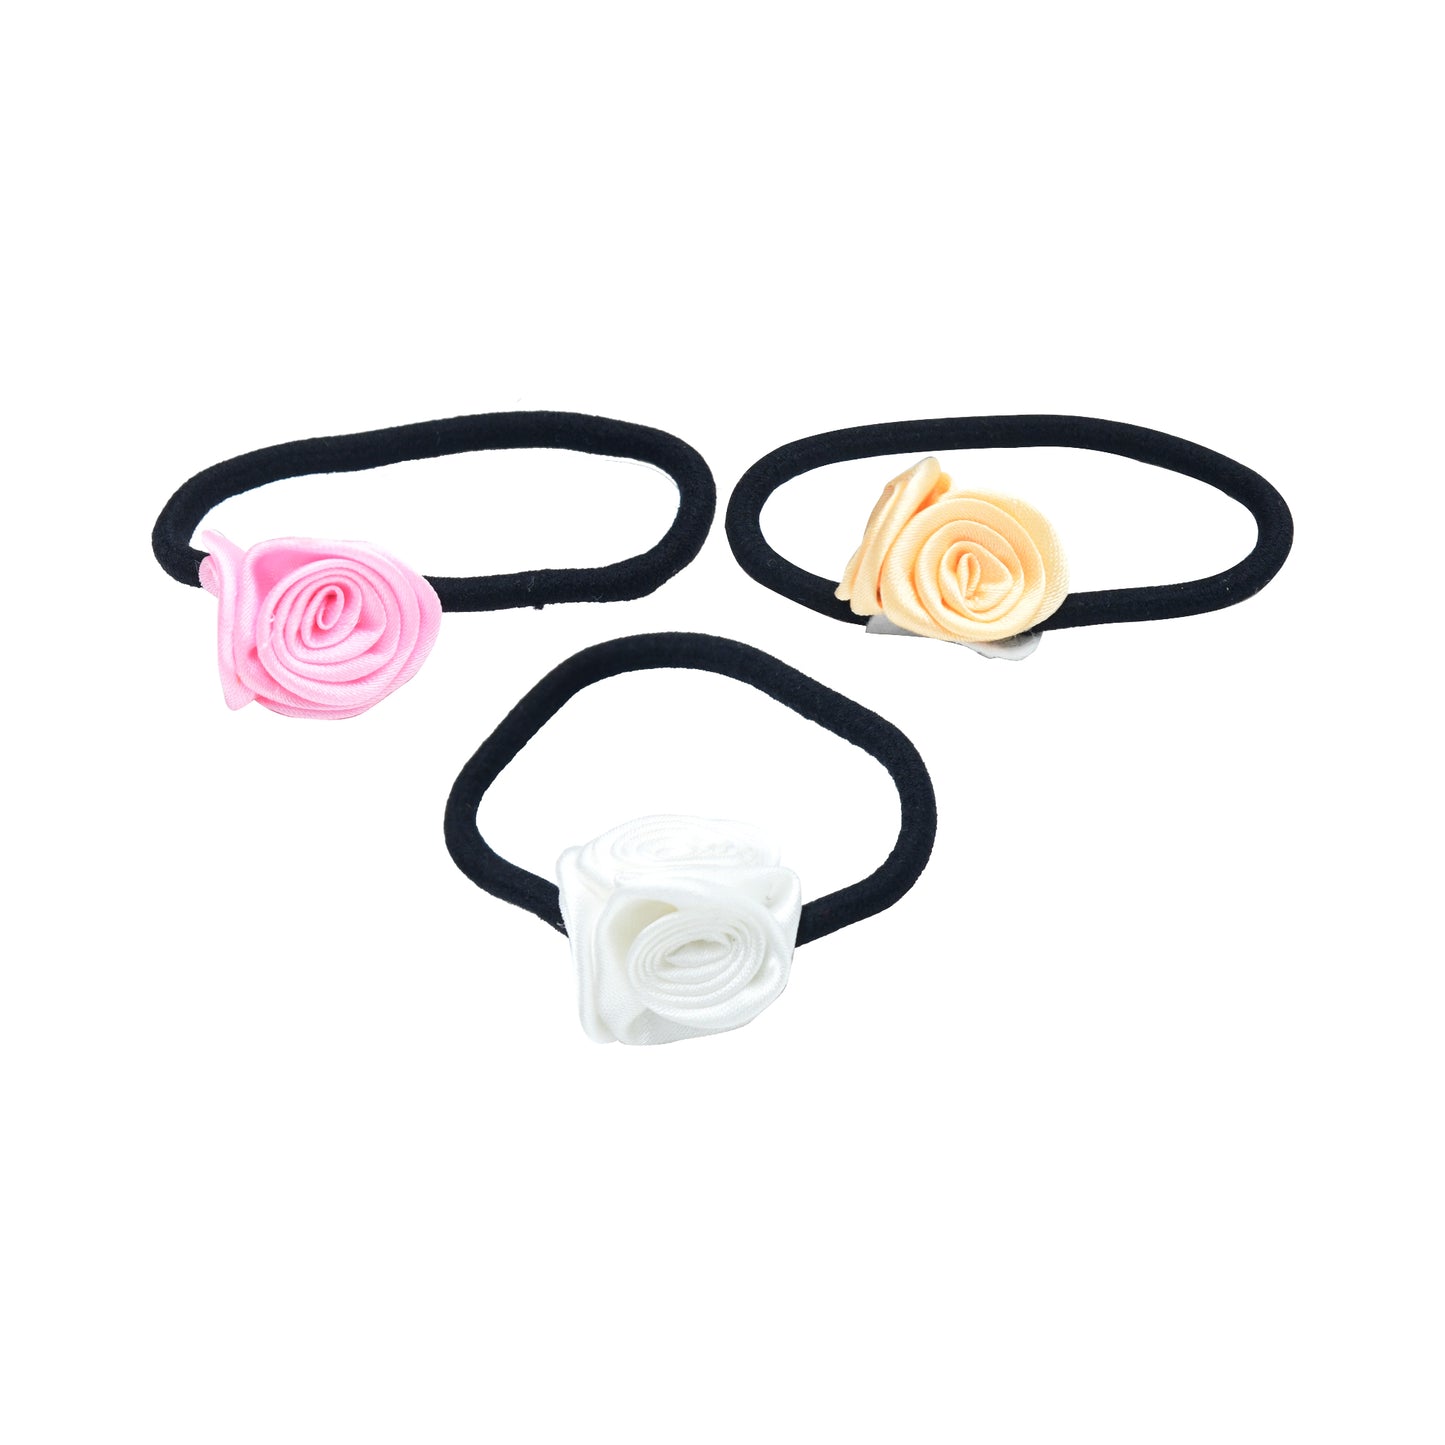 Multicolor Magic Touch Hair Ties for Girls (Combo)